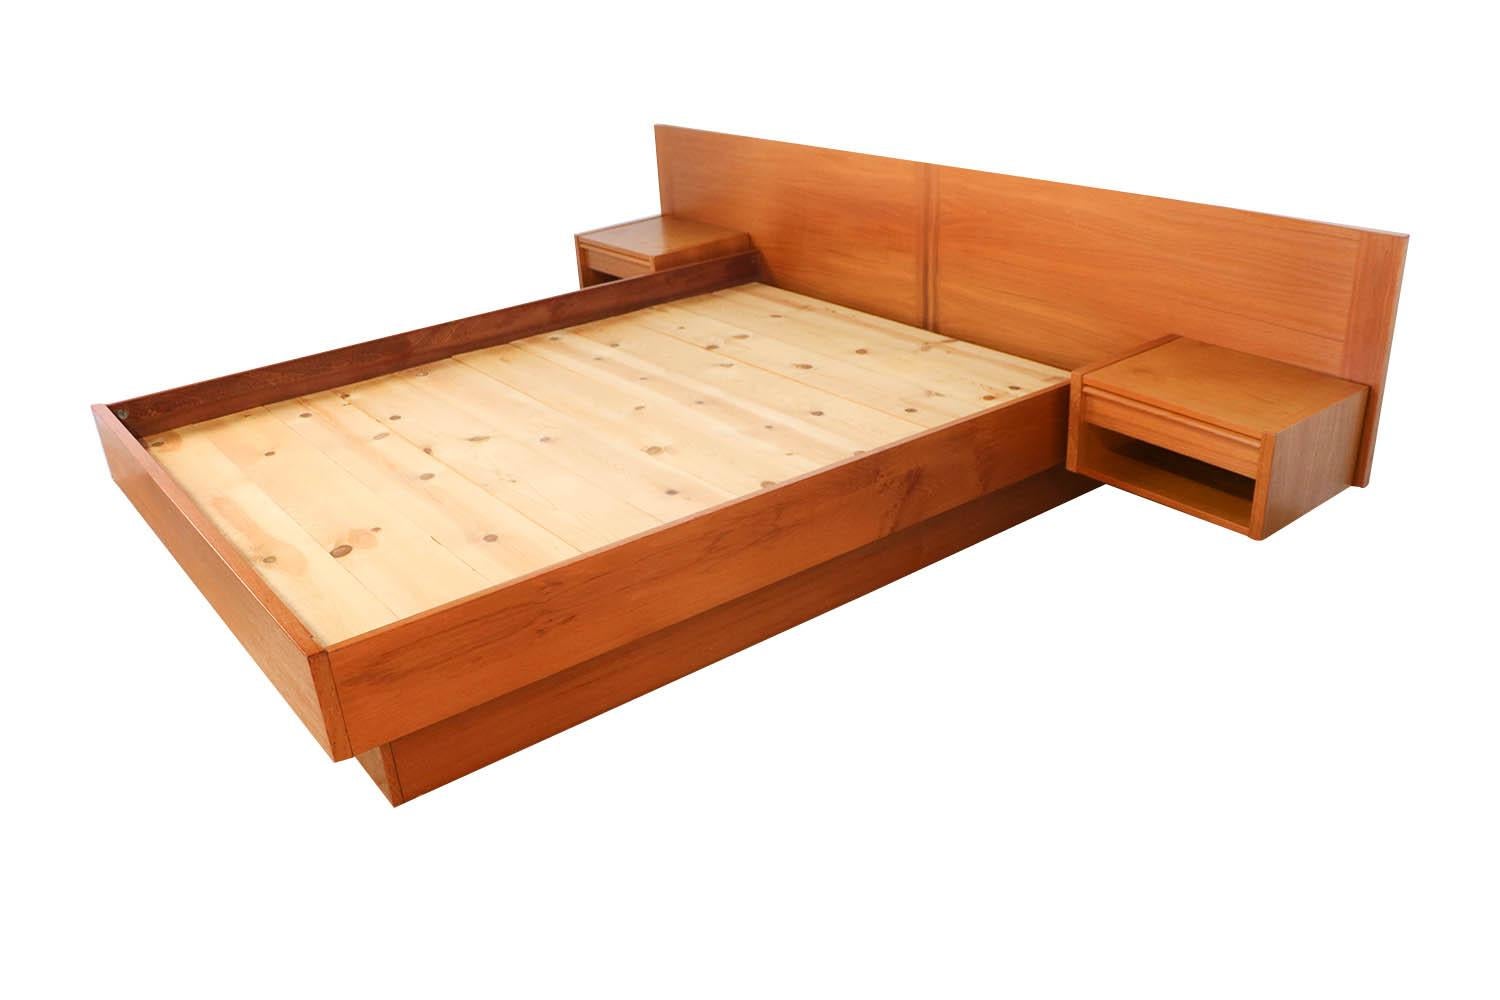 A remarkable Danish teak, midcentury queen platform bed with floating nightstands by Jesper of Denmark. Maker’s label on back “Jesper”, including two sets of slats for extra support. Exceptional construction and style. Featuring a stunning headboard